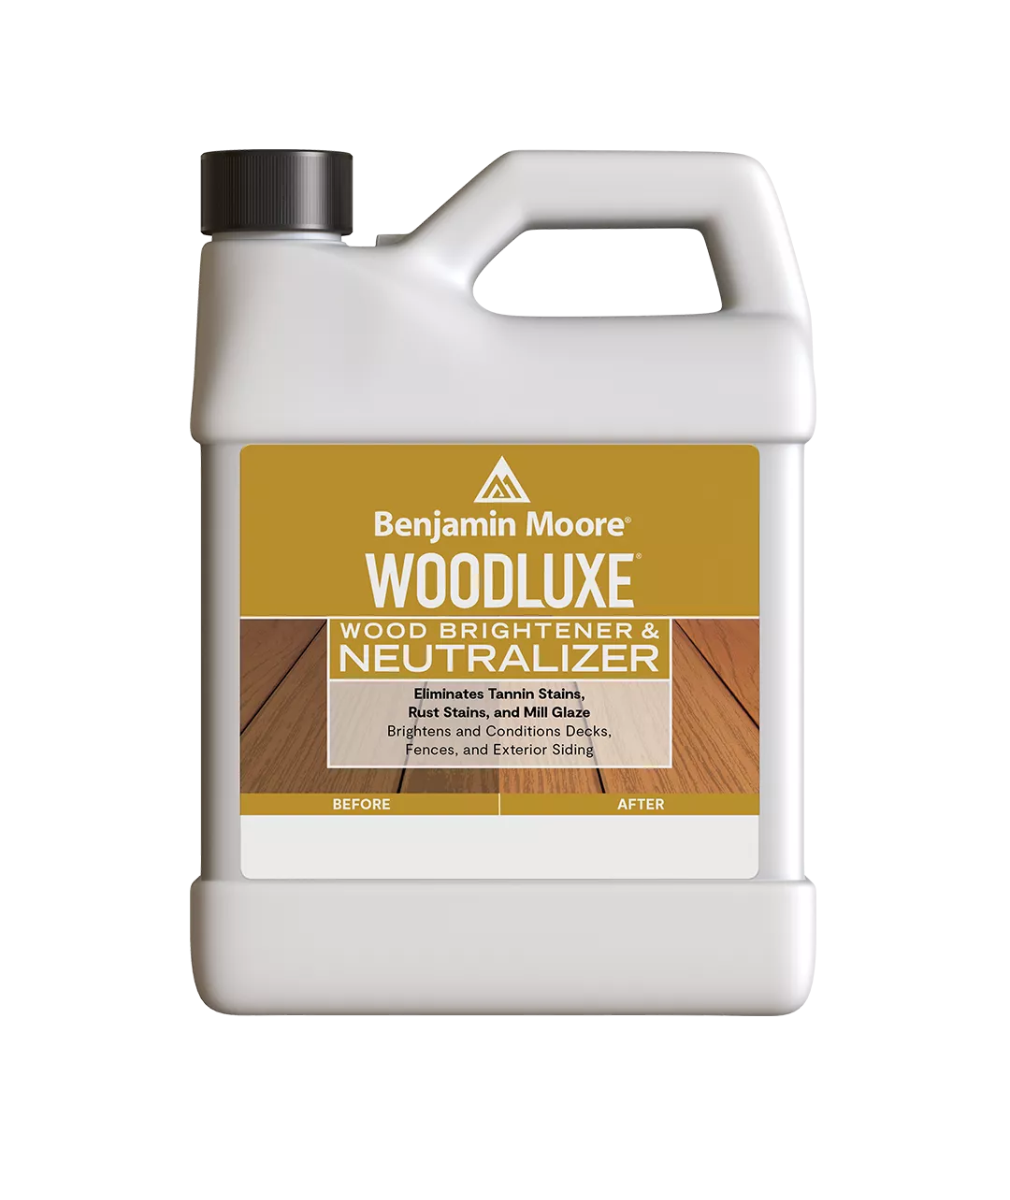 Benjamin Moore Woodluxe Wood Brightener & Neutralizer Gallon available at JC Licht.